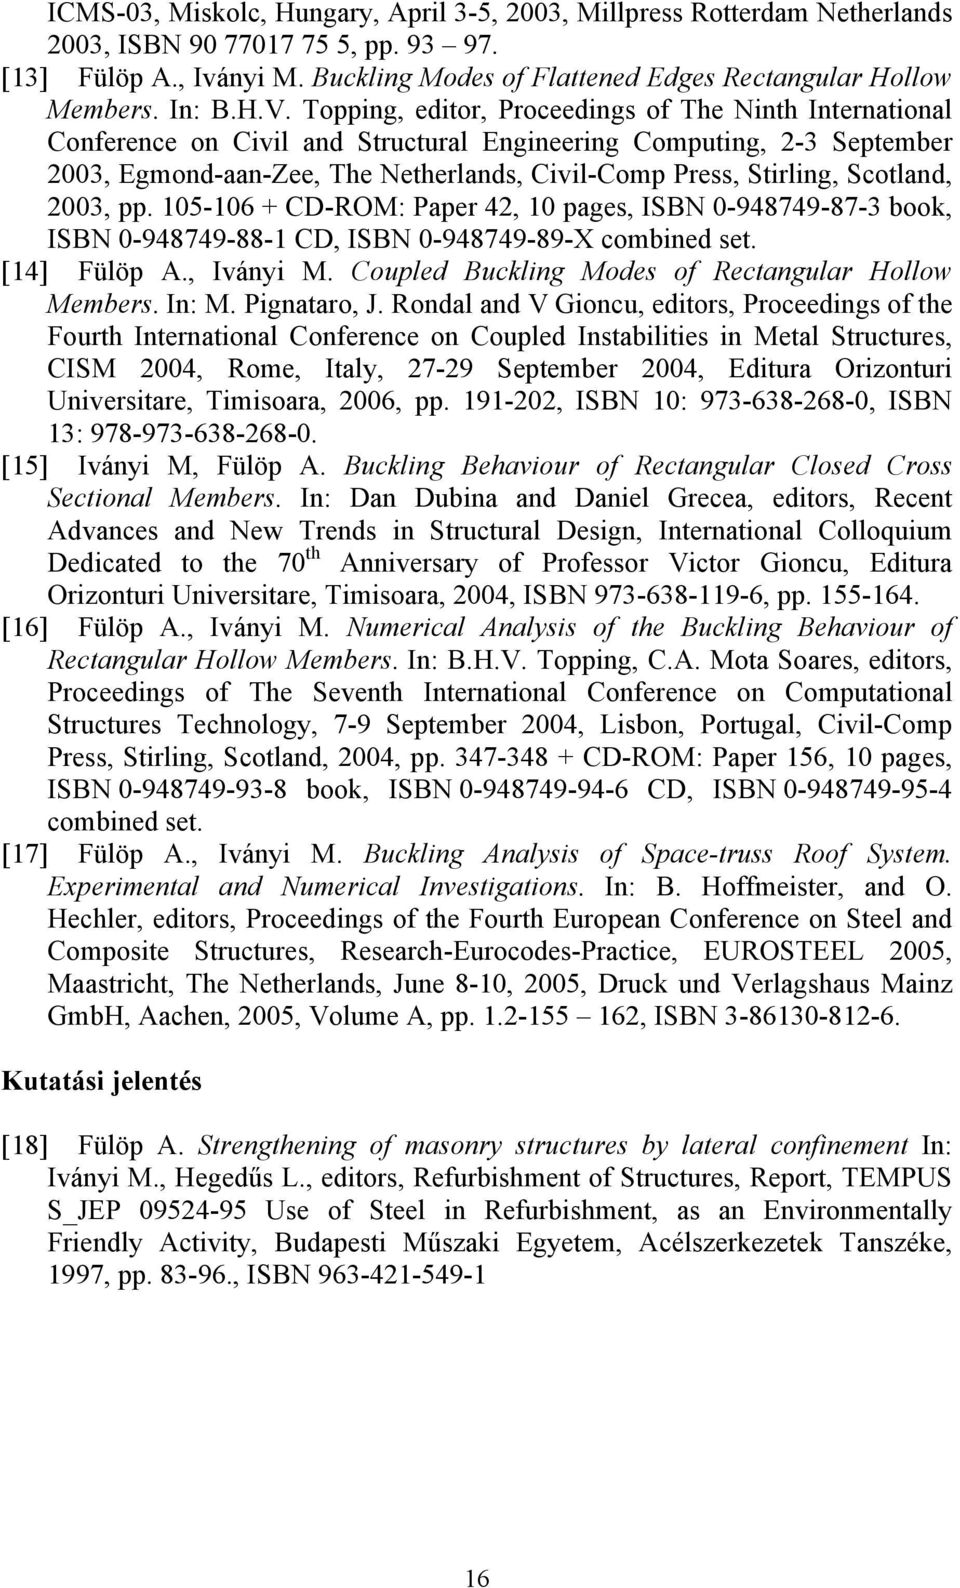 Topping, editor, Proceedings of The Ninth International Conference on Civil and Structural Engineering Computing, 2-3 September 2003, Egmond-aan-Zee, The Netherlands, Civil-Comp Press, Stirling,